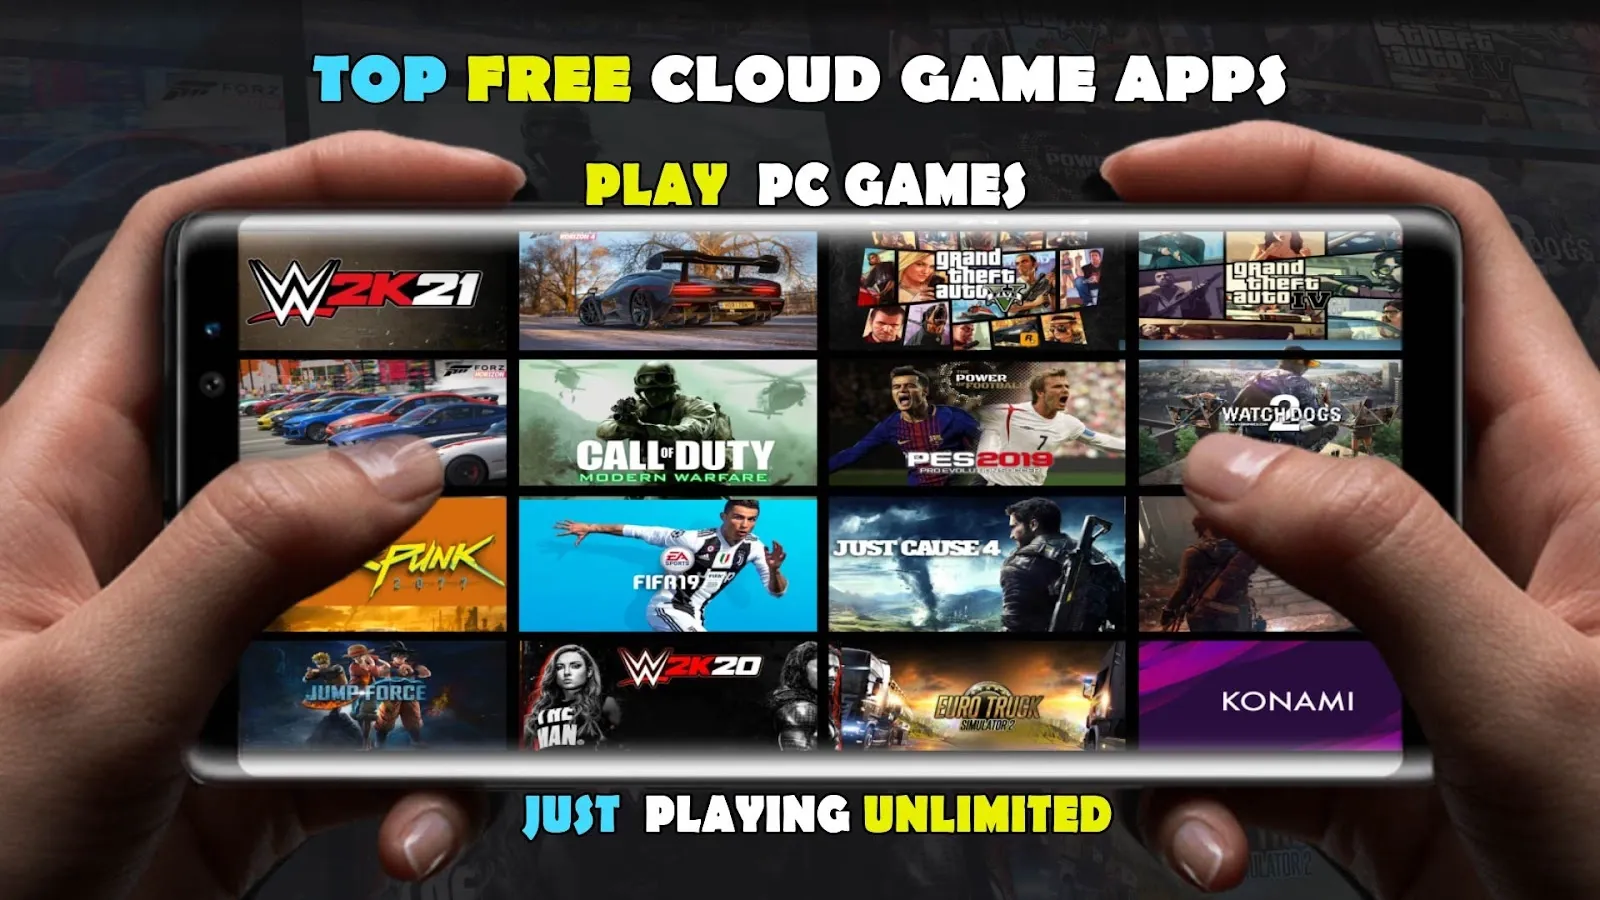 Best Free Cloud Gaming Apps For Android and iOS